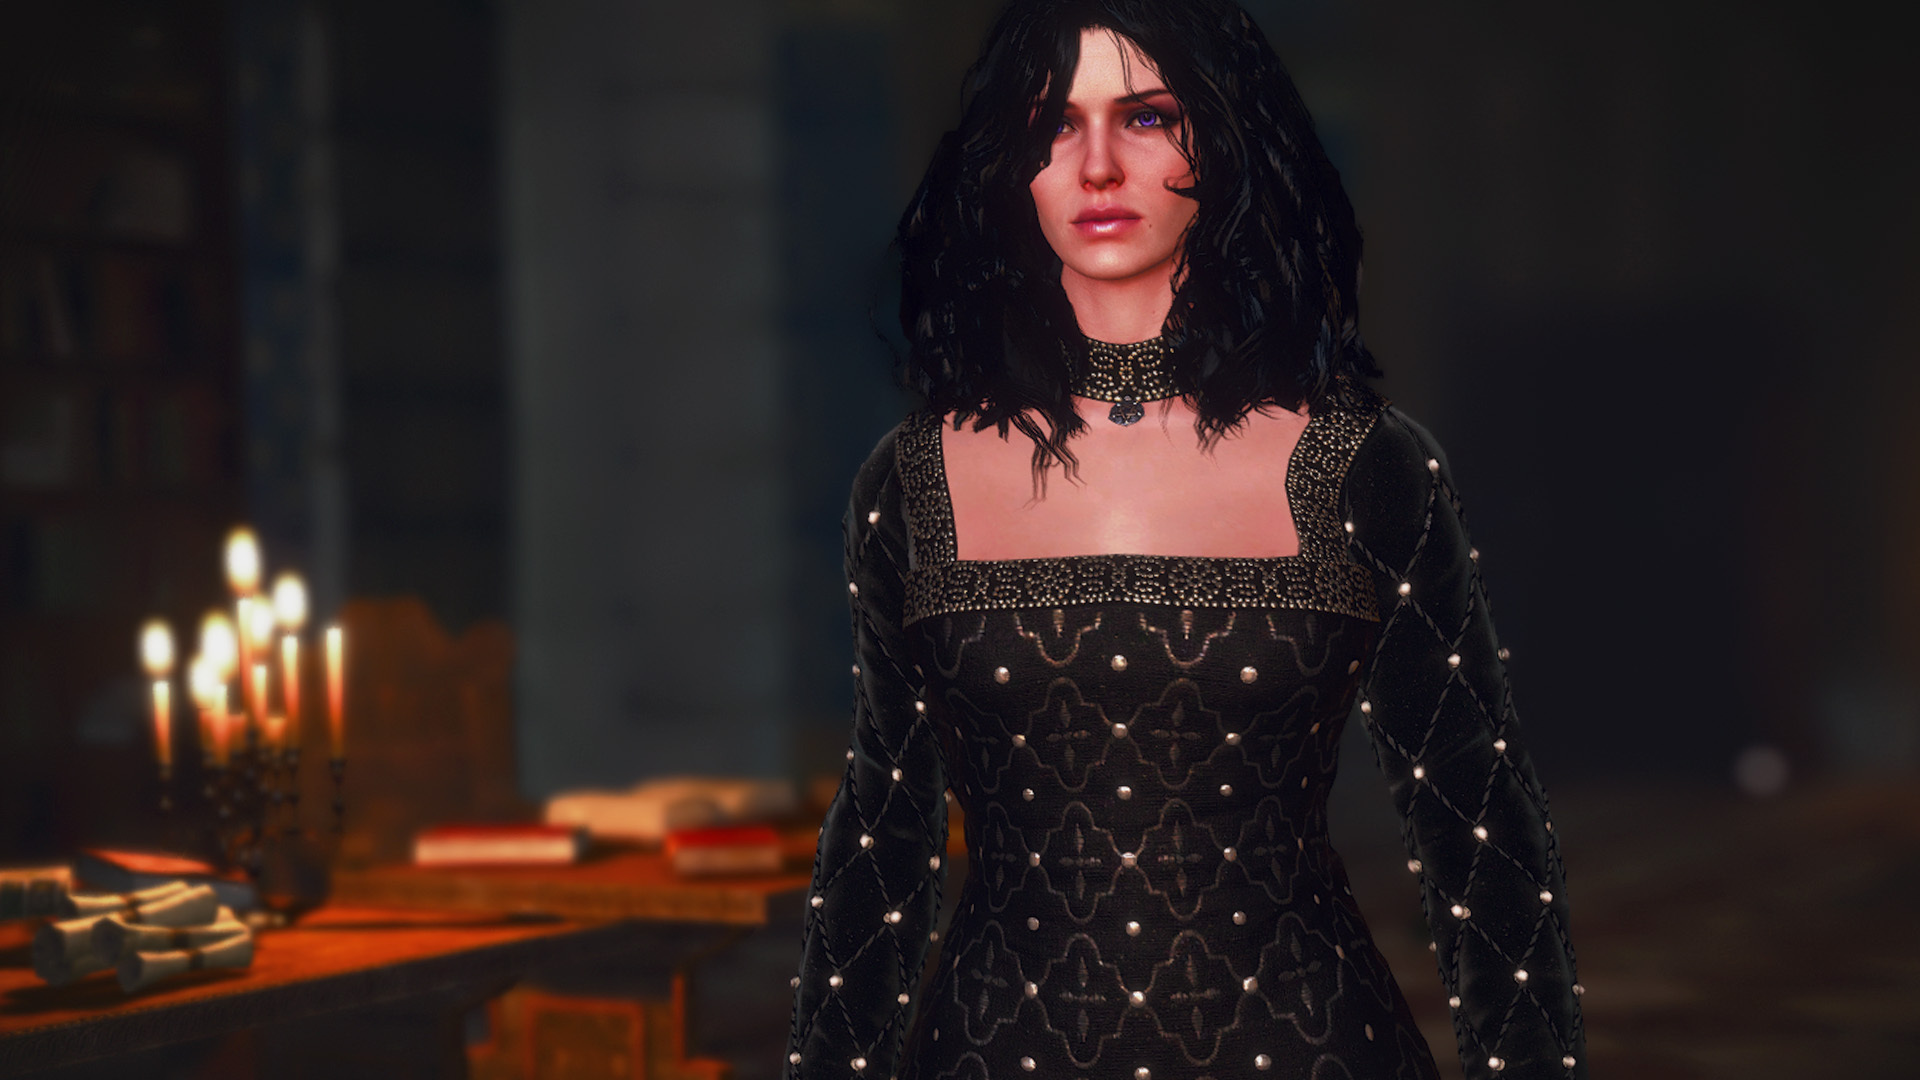 Yennefer of vengerberg the witcher 3 voiced standalone follower фото 107